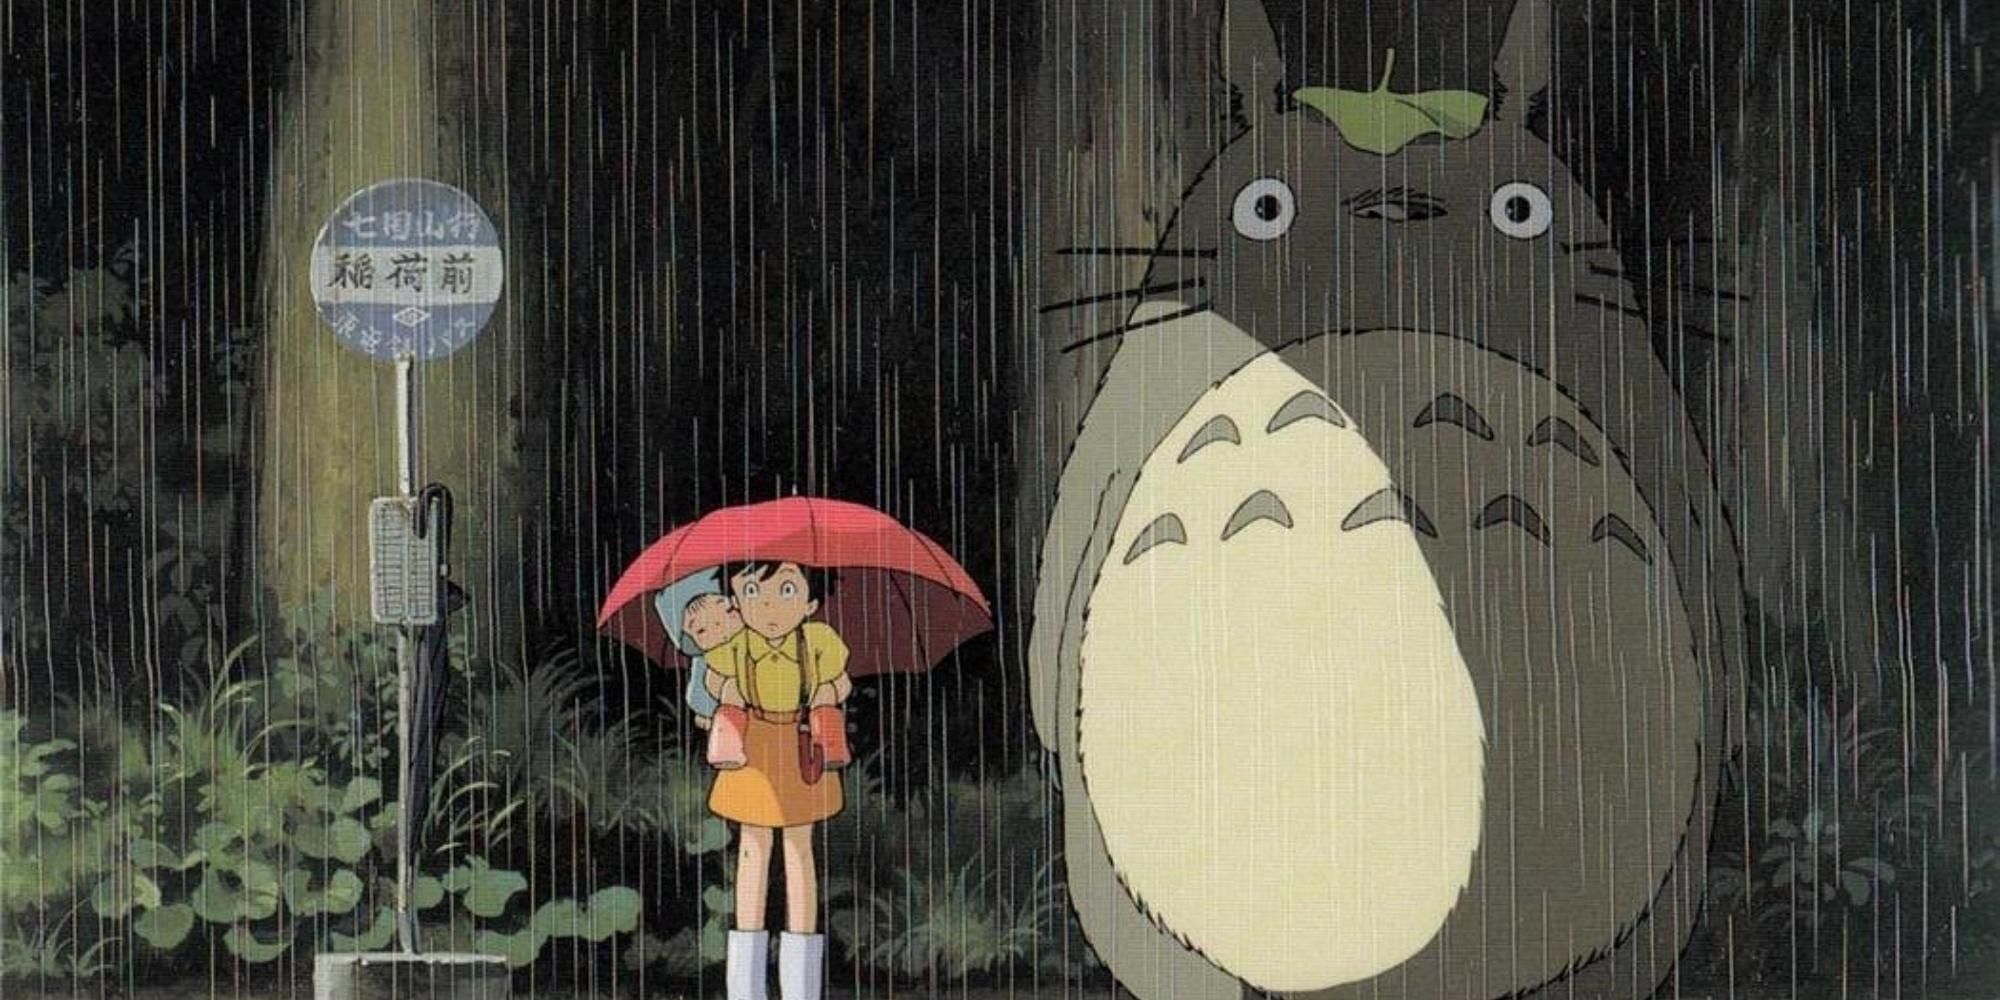 Satsuki, Mei, and Totoro waiting at the bus stop in My Neighbor Totoro